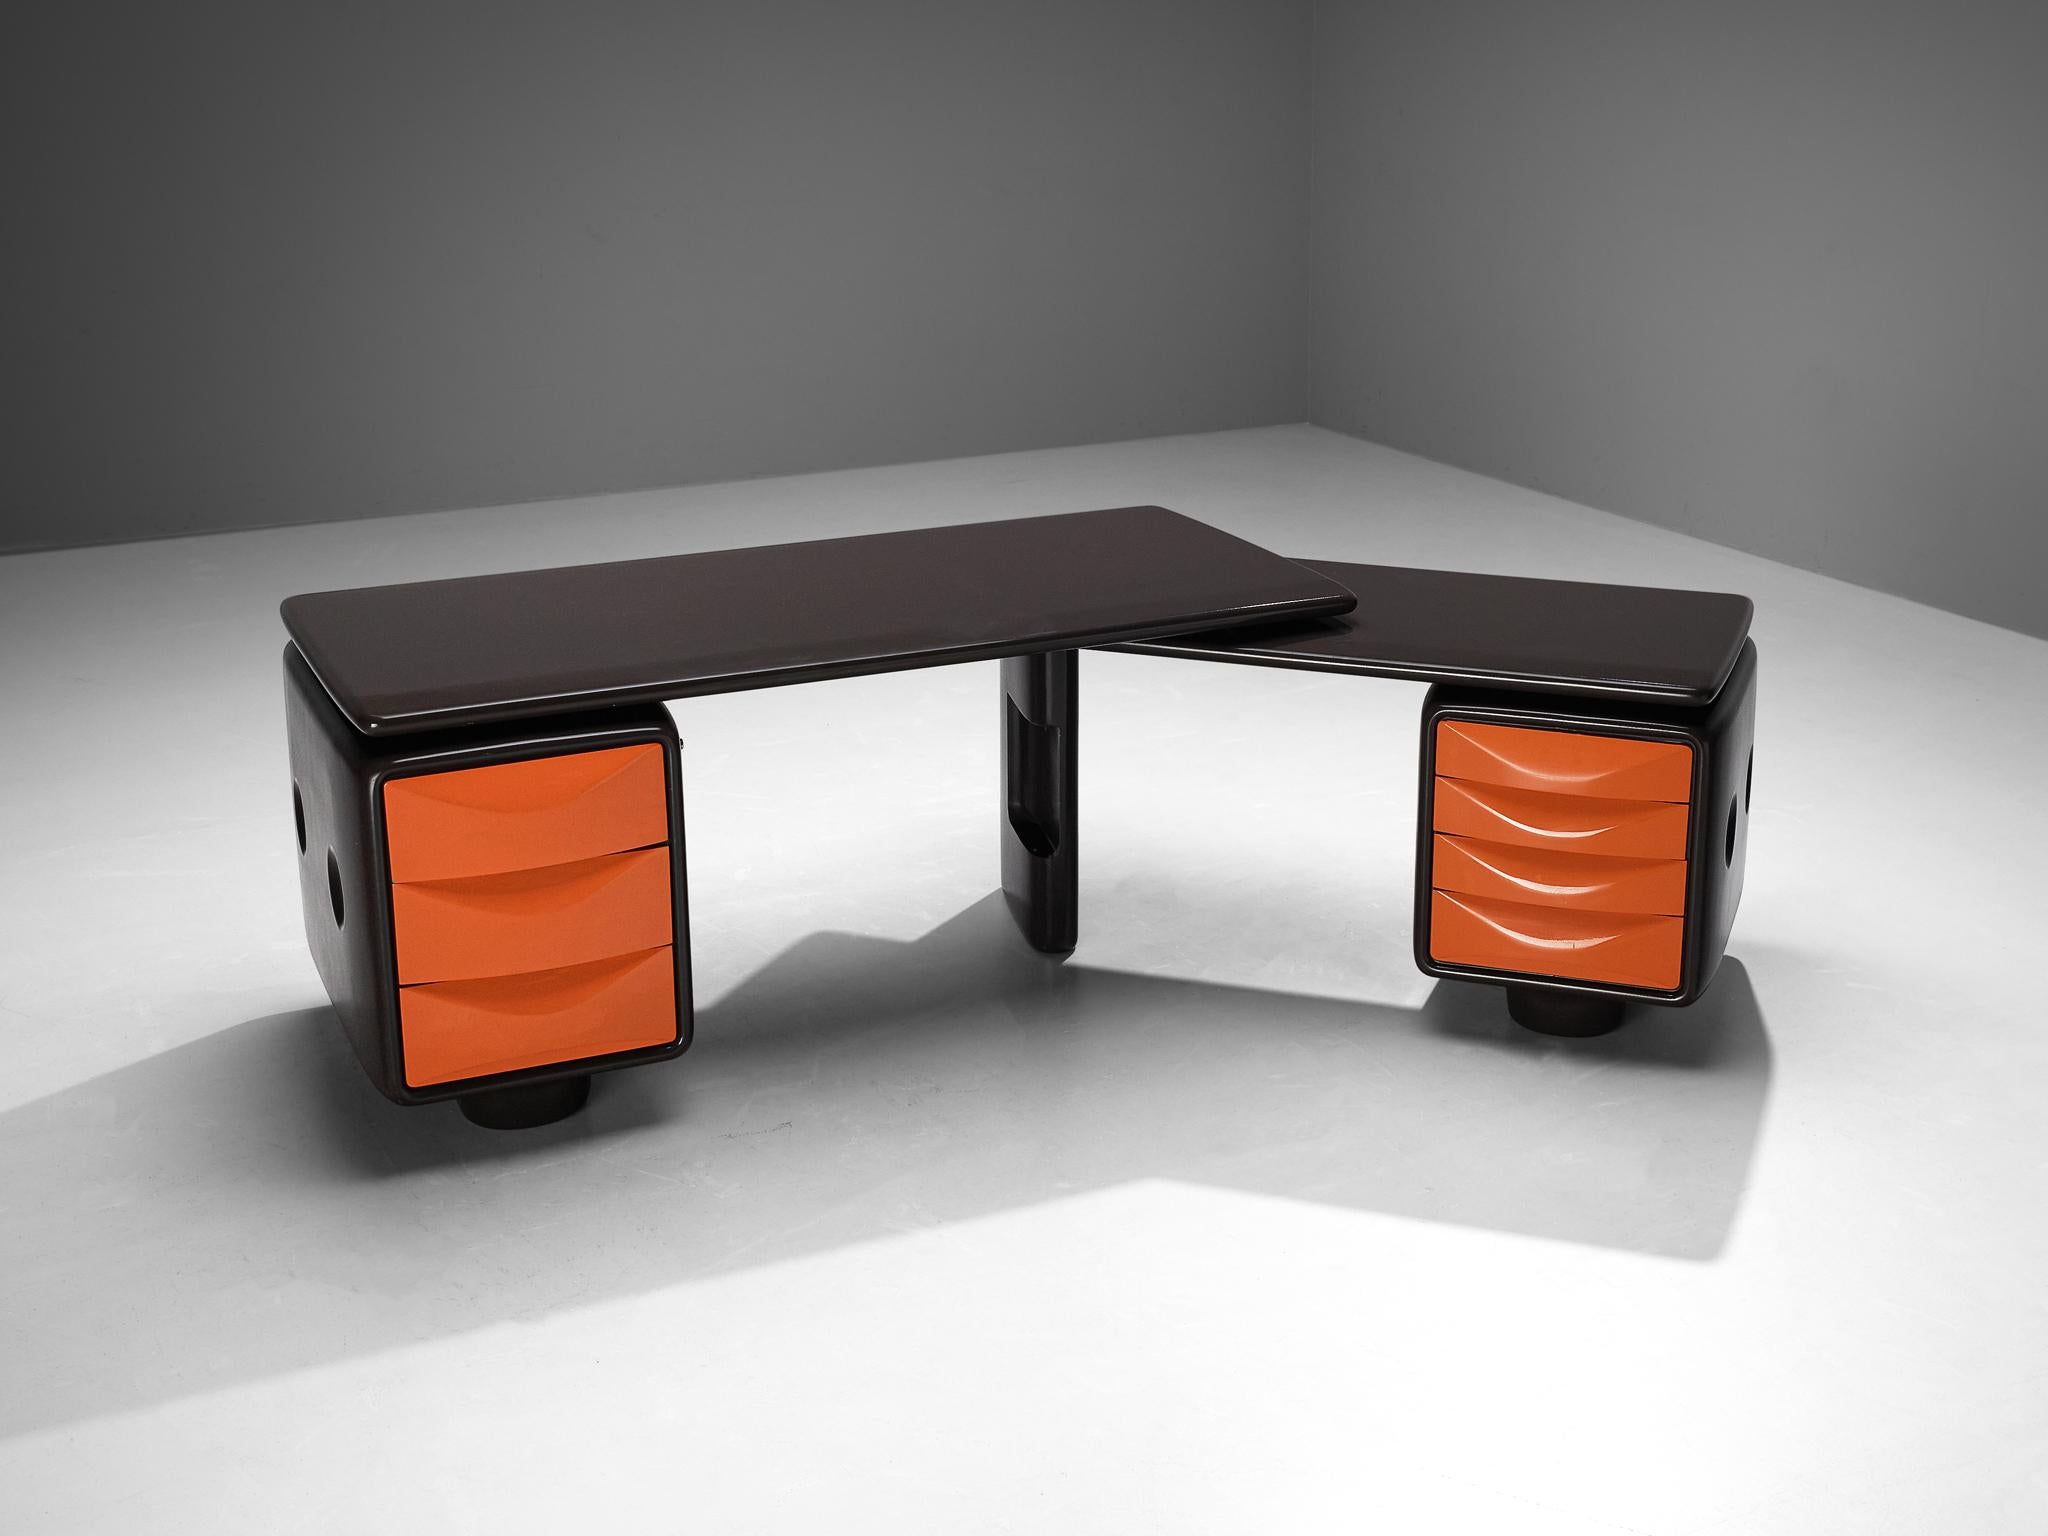 Ernest 'Igl' Hofmann for Wilhelm Werndl, corner desk, model 'Jet', fiberglass, Germany, design 1970 

This design truly fits within the ethos of the seventies – a bright and bold era – featuring the commonly used material of that time named